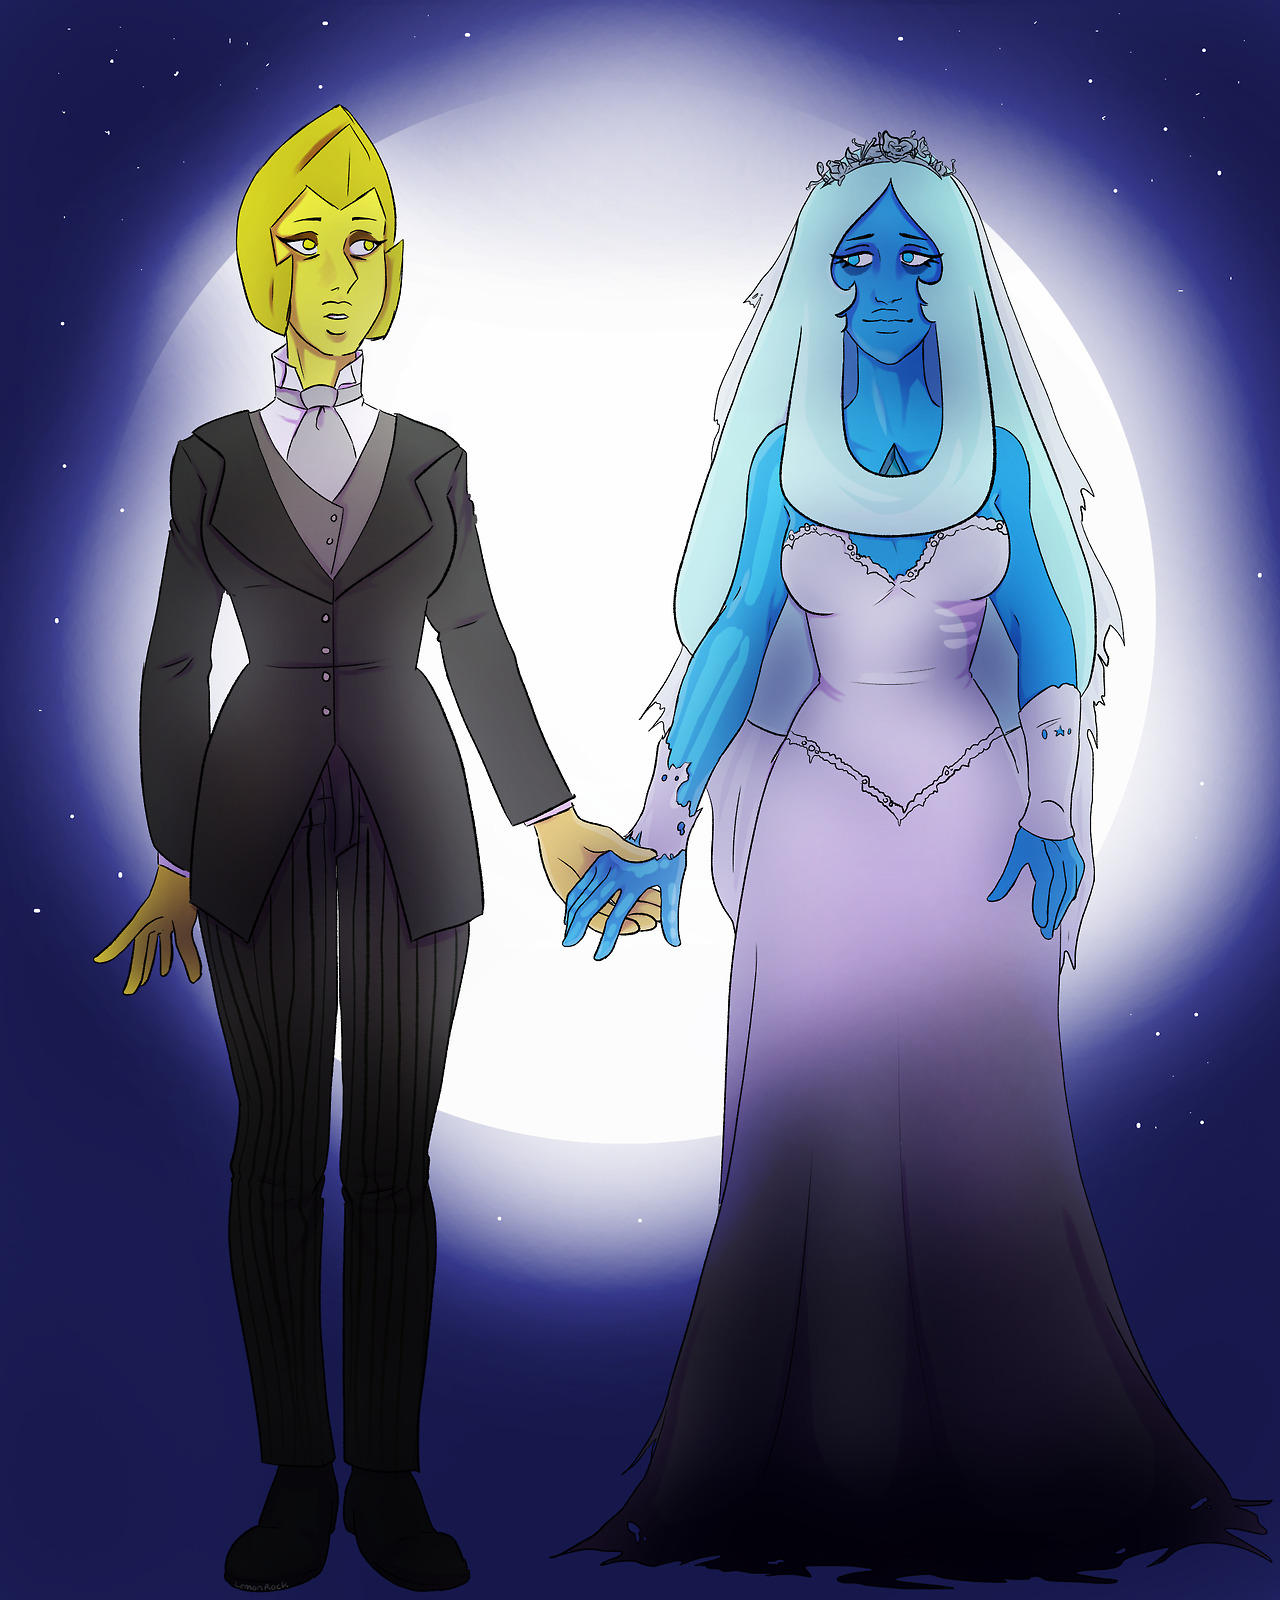 I saw that one post of them as Morticia and Gomez Addams and I was like, I gotta get in on that, so heres them as Victor and Emily from the Corpse Bride